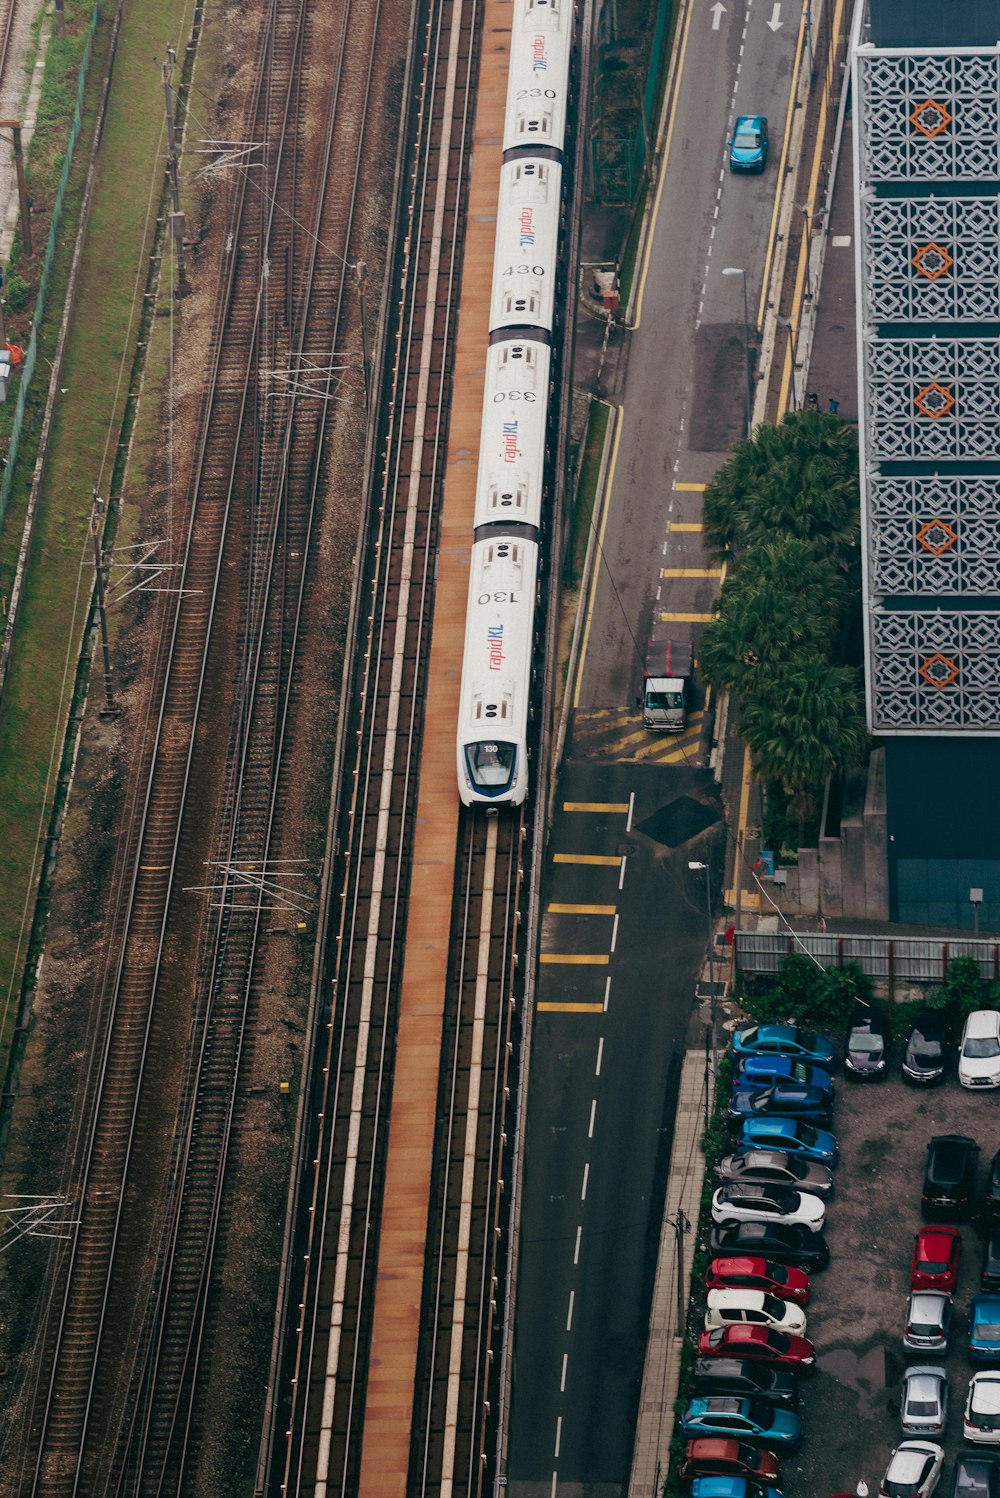 an aerial view of a train on the tracks